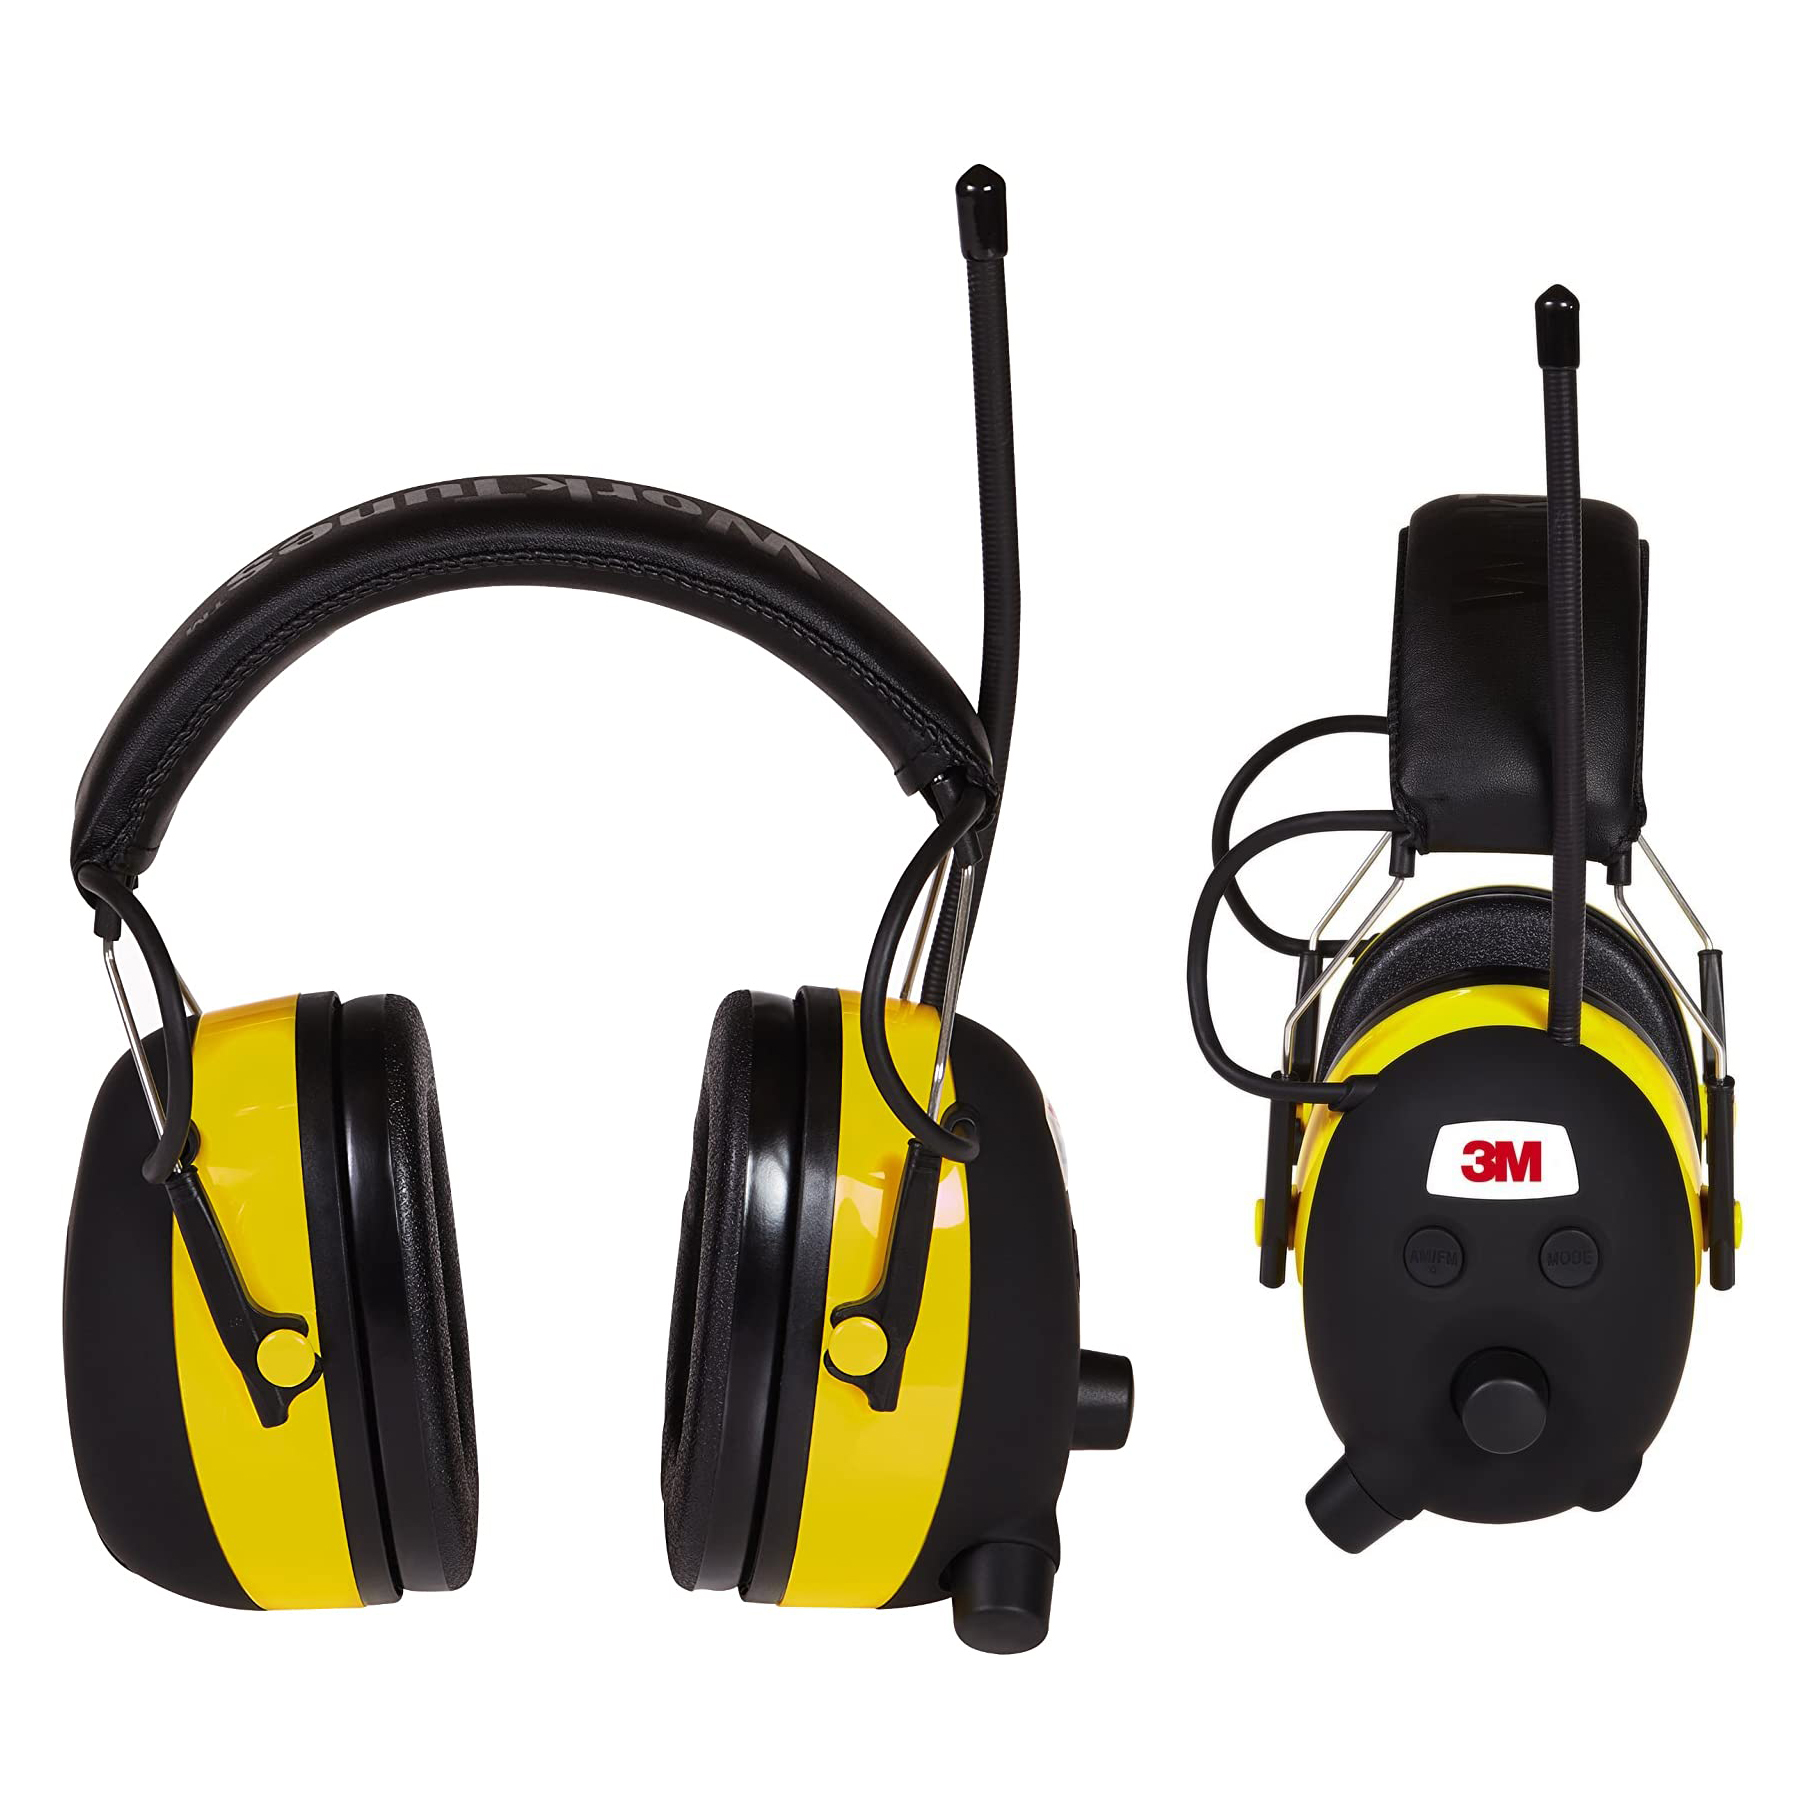 3M WorkTunes AM_FM Hearing Protector with Audio Assist Technology Still